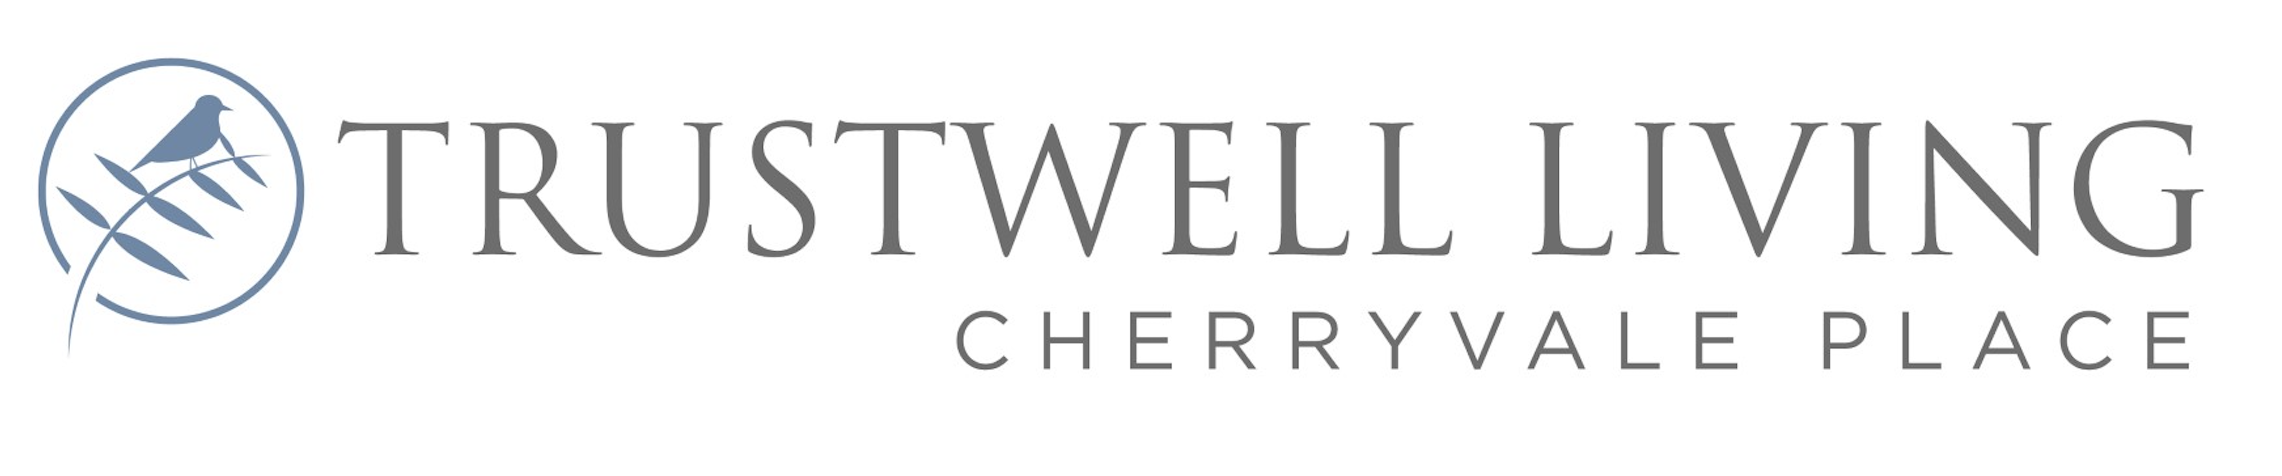 Trustwell Living Cherryvale Place